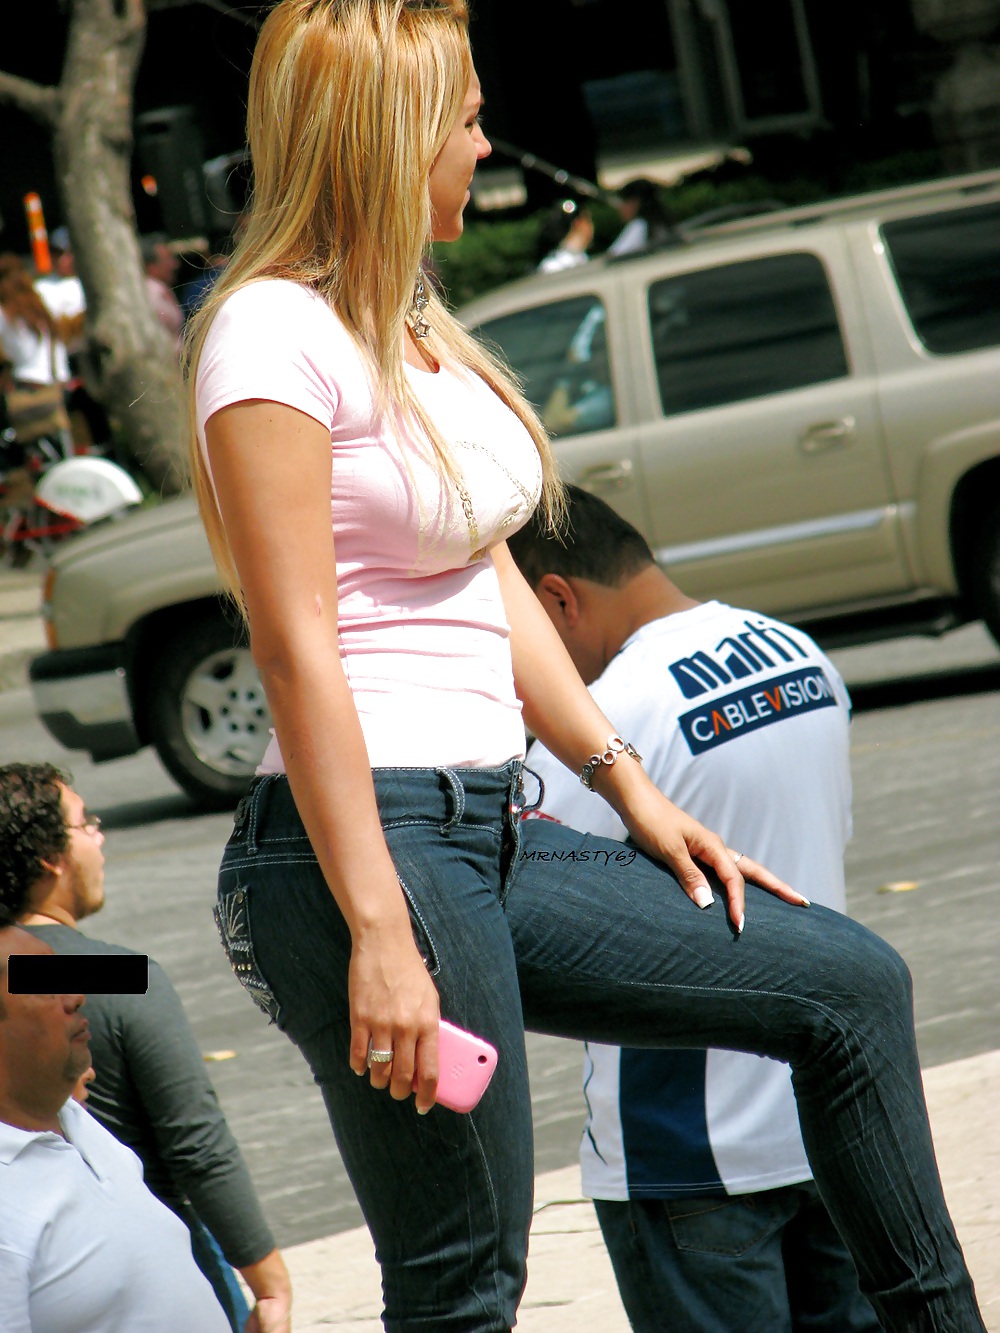 Wife In Tight Jeans #8 #14228408